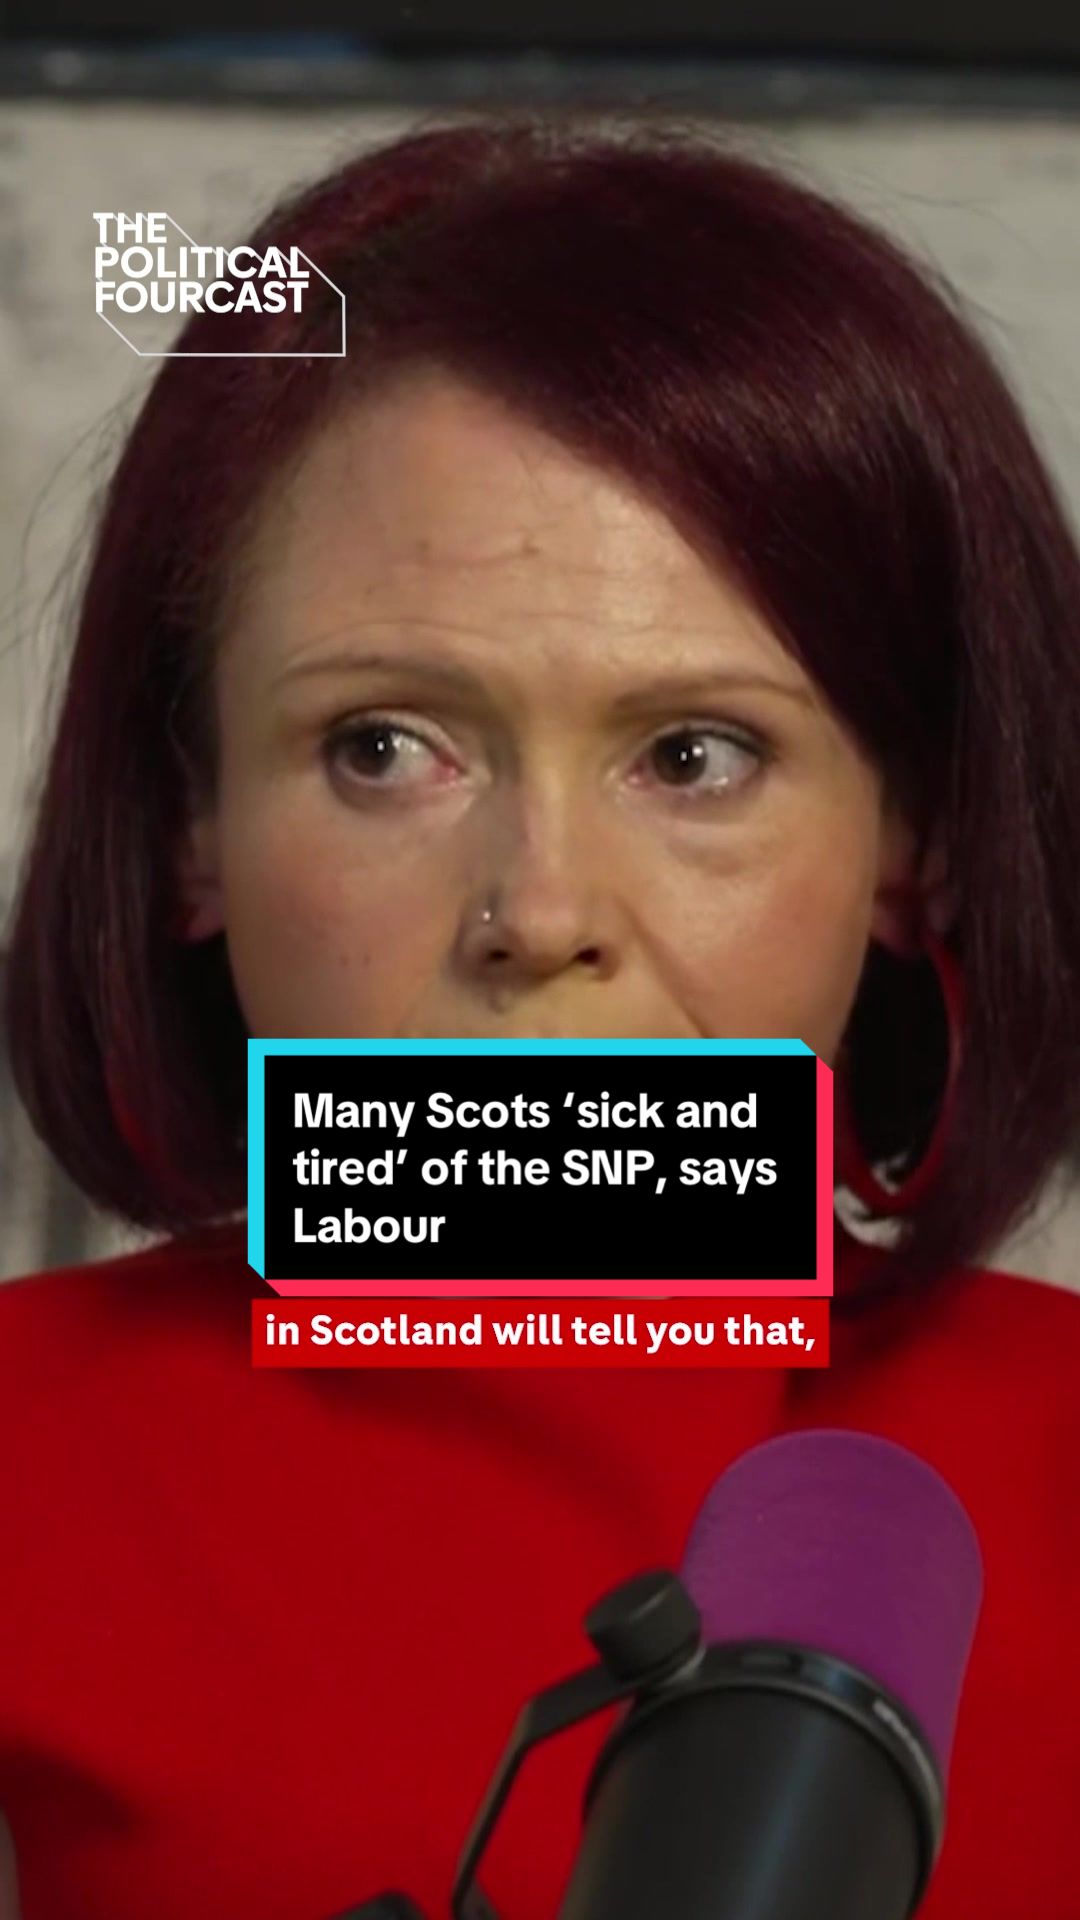 "Absolutely anything, for the SNP, is a reason to have another independence referendum." Scottish Labour's Pam Duncan-Glancy says "the purpose of the SNP right now should be to govern Scotland", instead of focusing on breaking up with the UK. #Podcast #Elections #UKPolitics #Channel4News